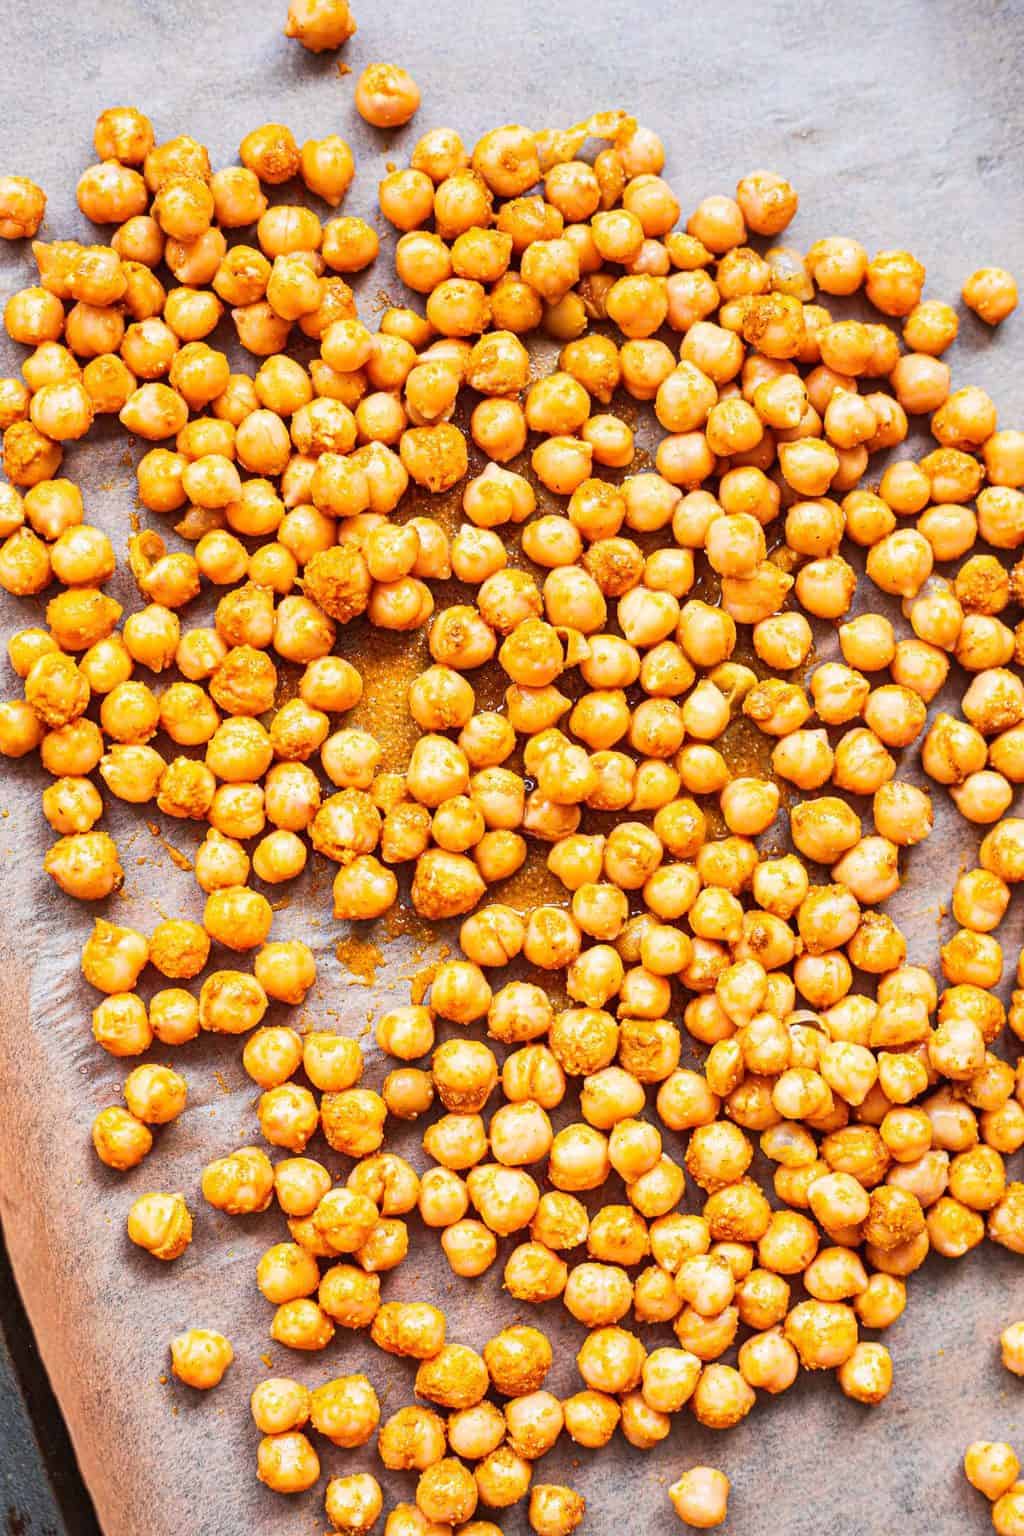 Chickpeas on a baking tray